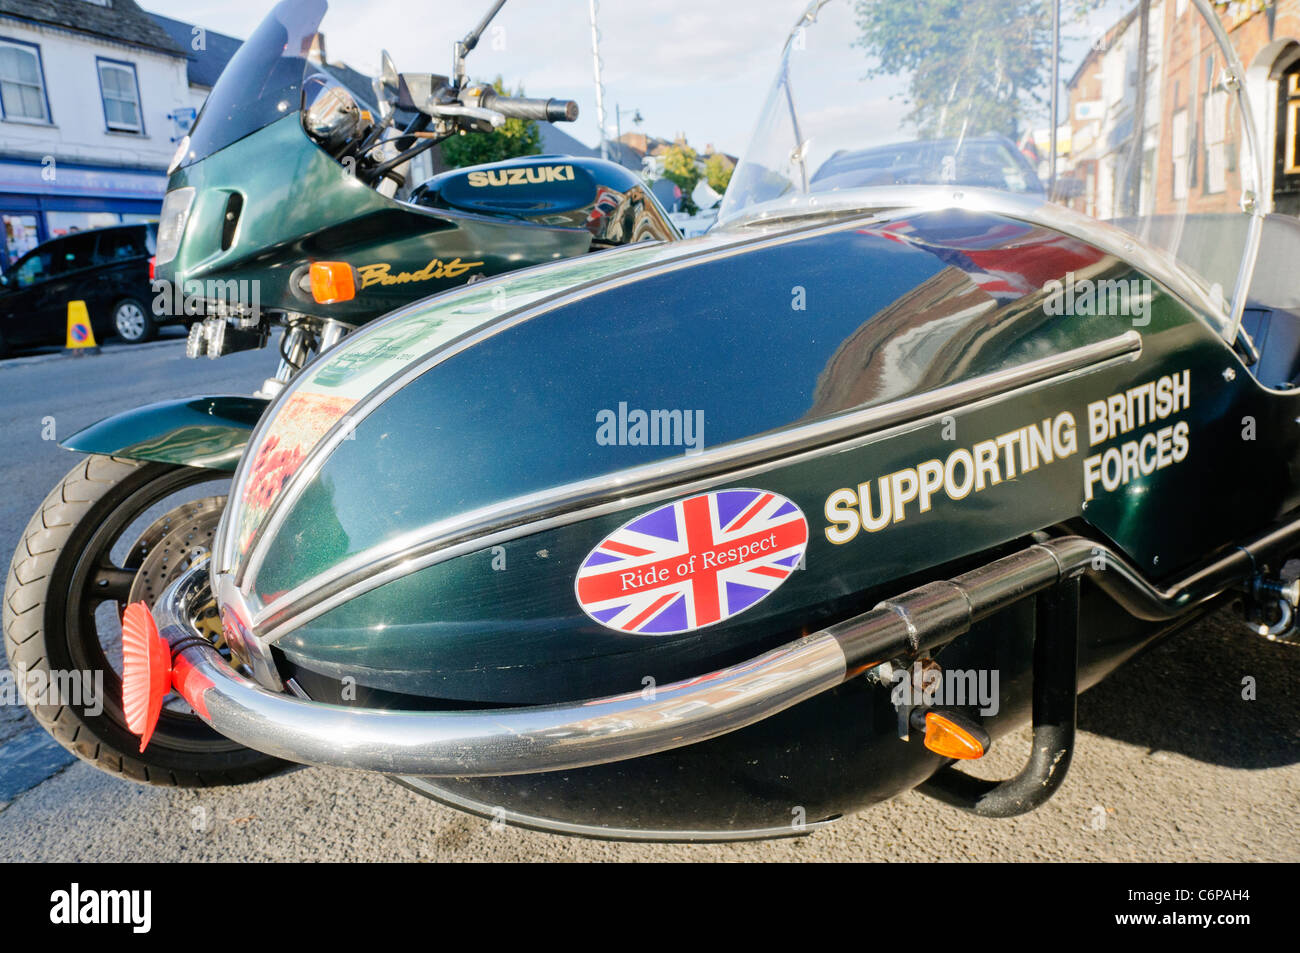 Motorcycle and sidecar belonging to member of Afghan Heroes, supporting British Troops Stock Photo